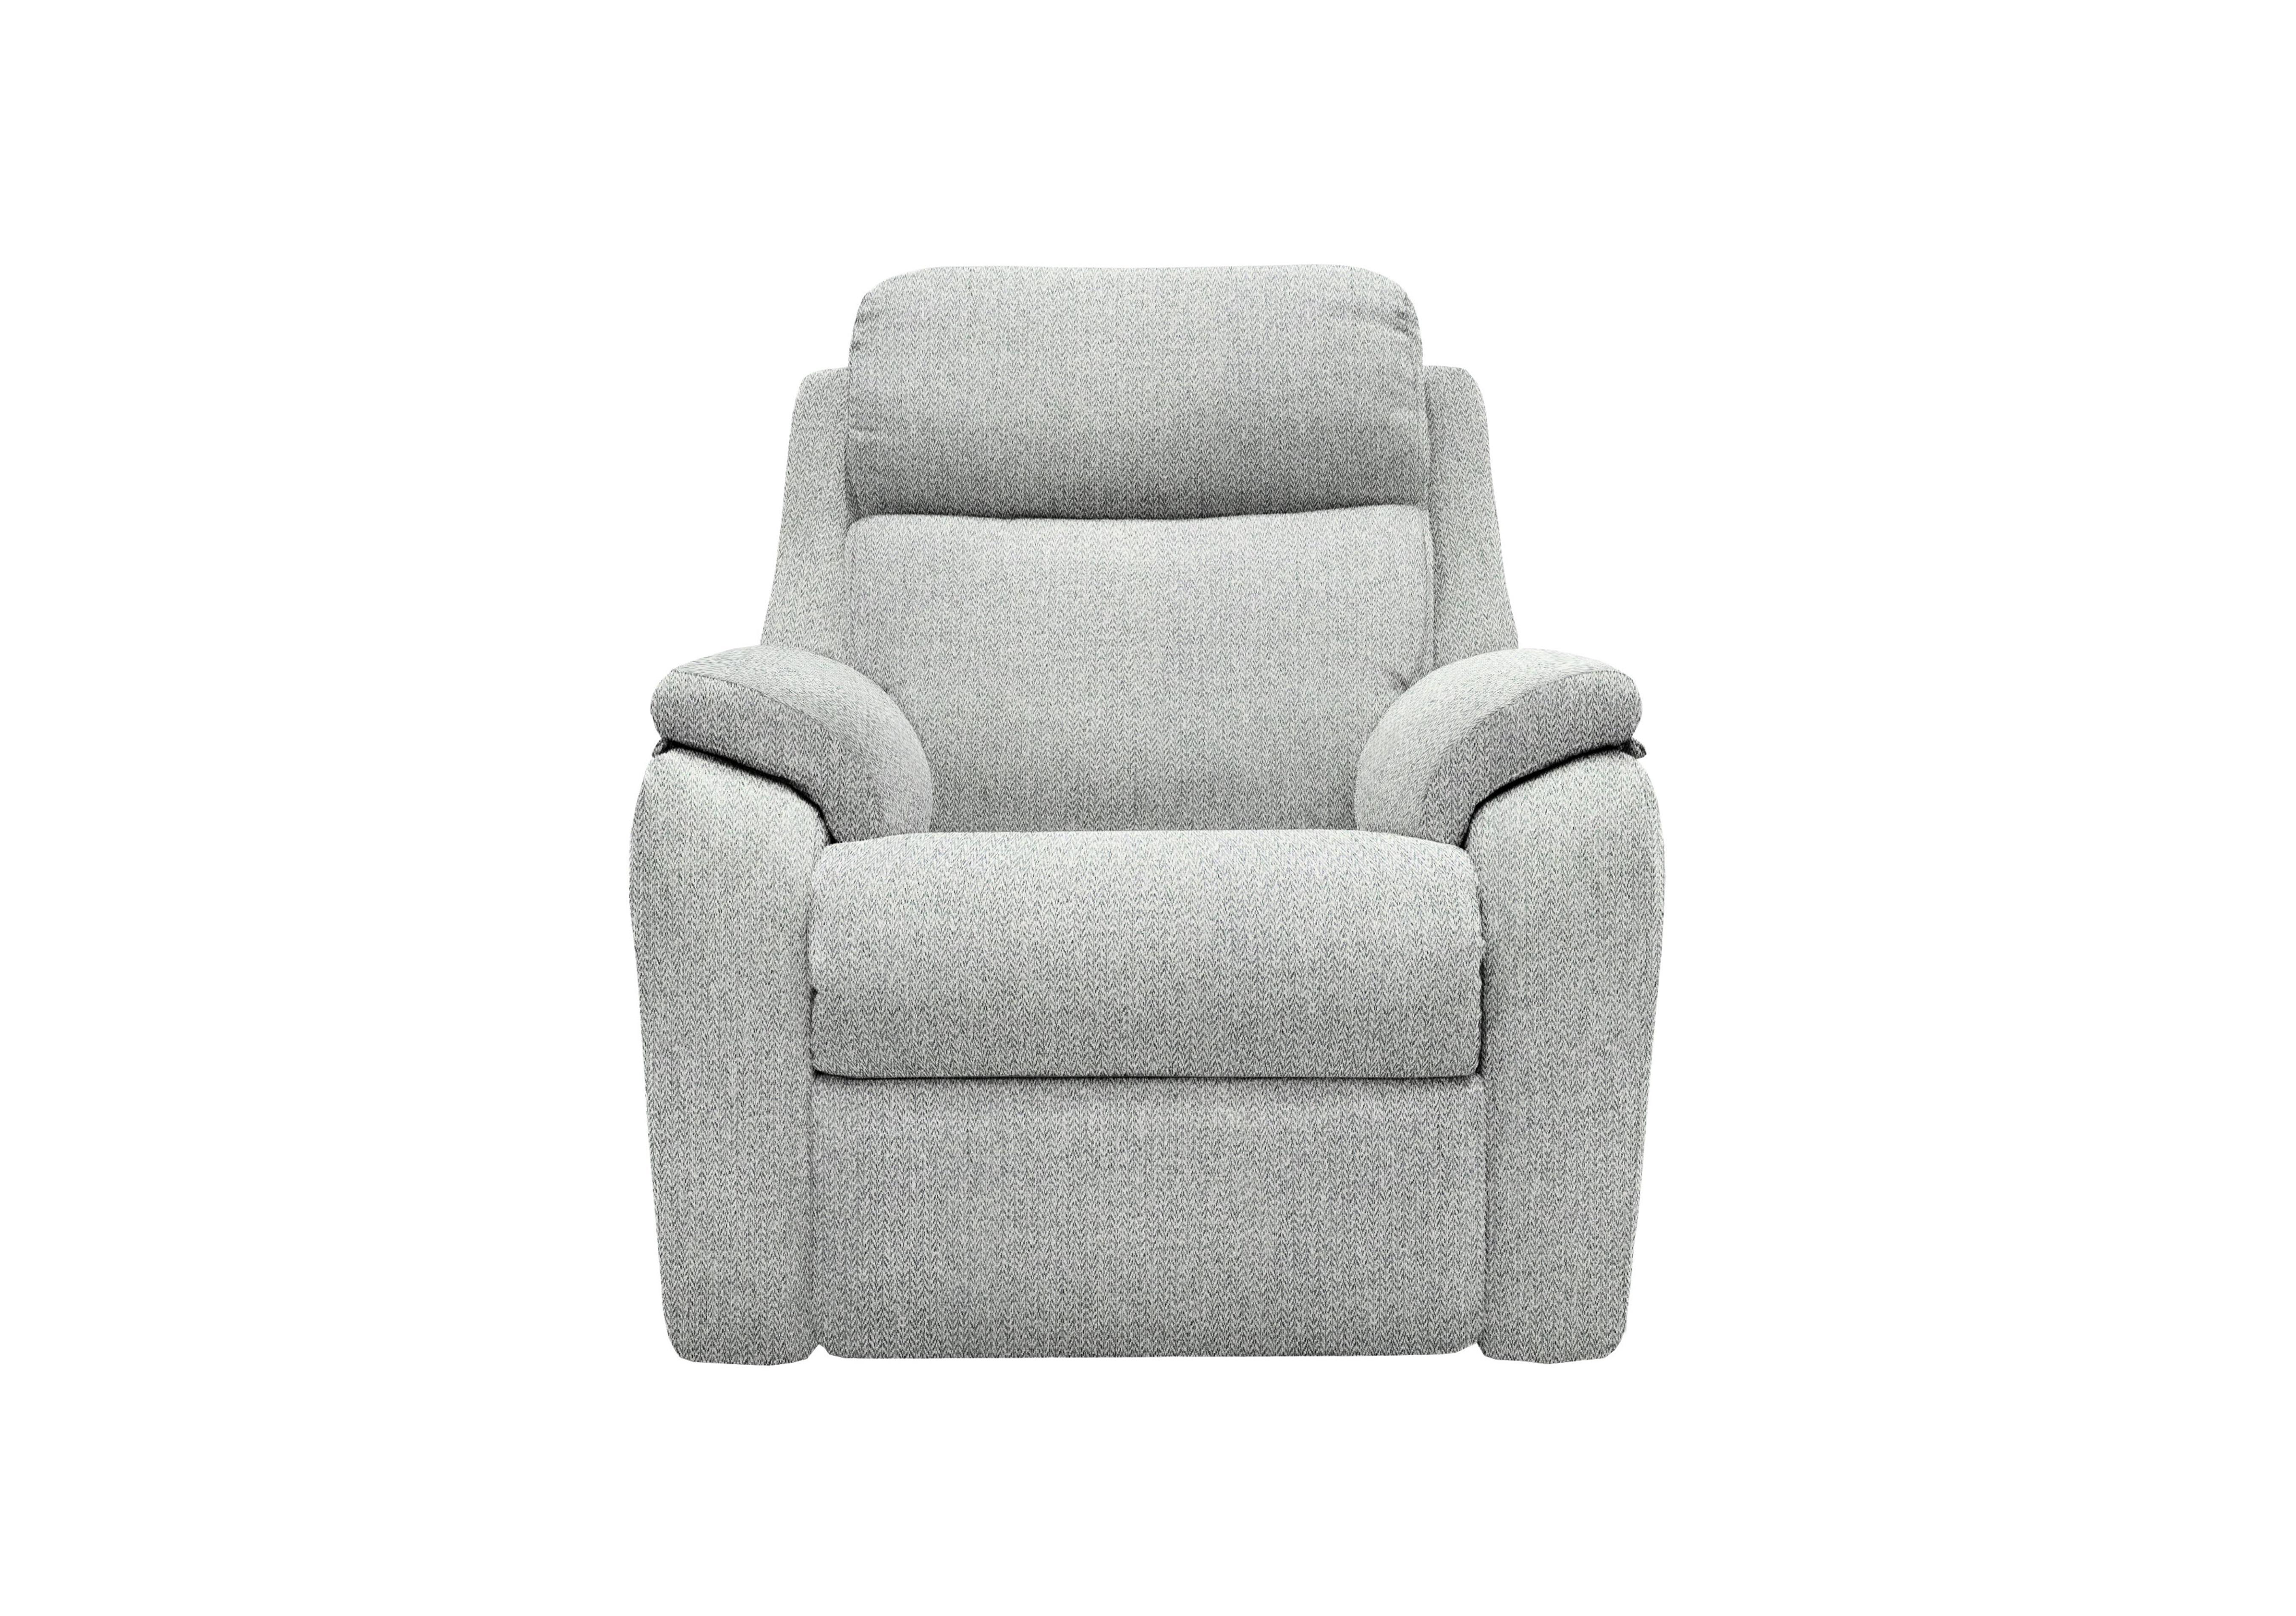 Kingsbury Fabric Power Recliner Armchair with Power Headrests in A011 Swift Cygnet on Furniture Village